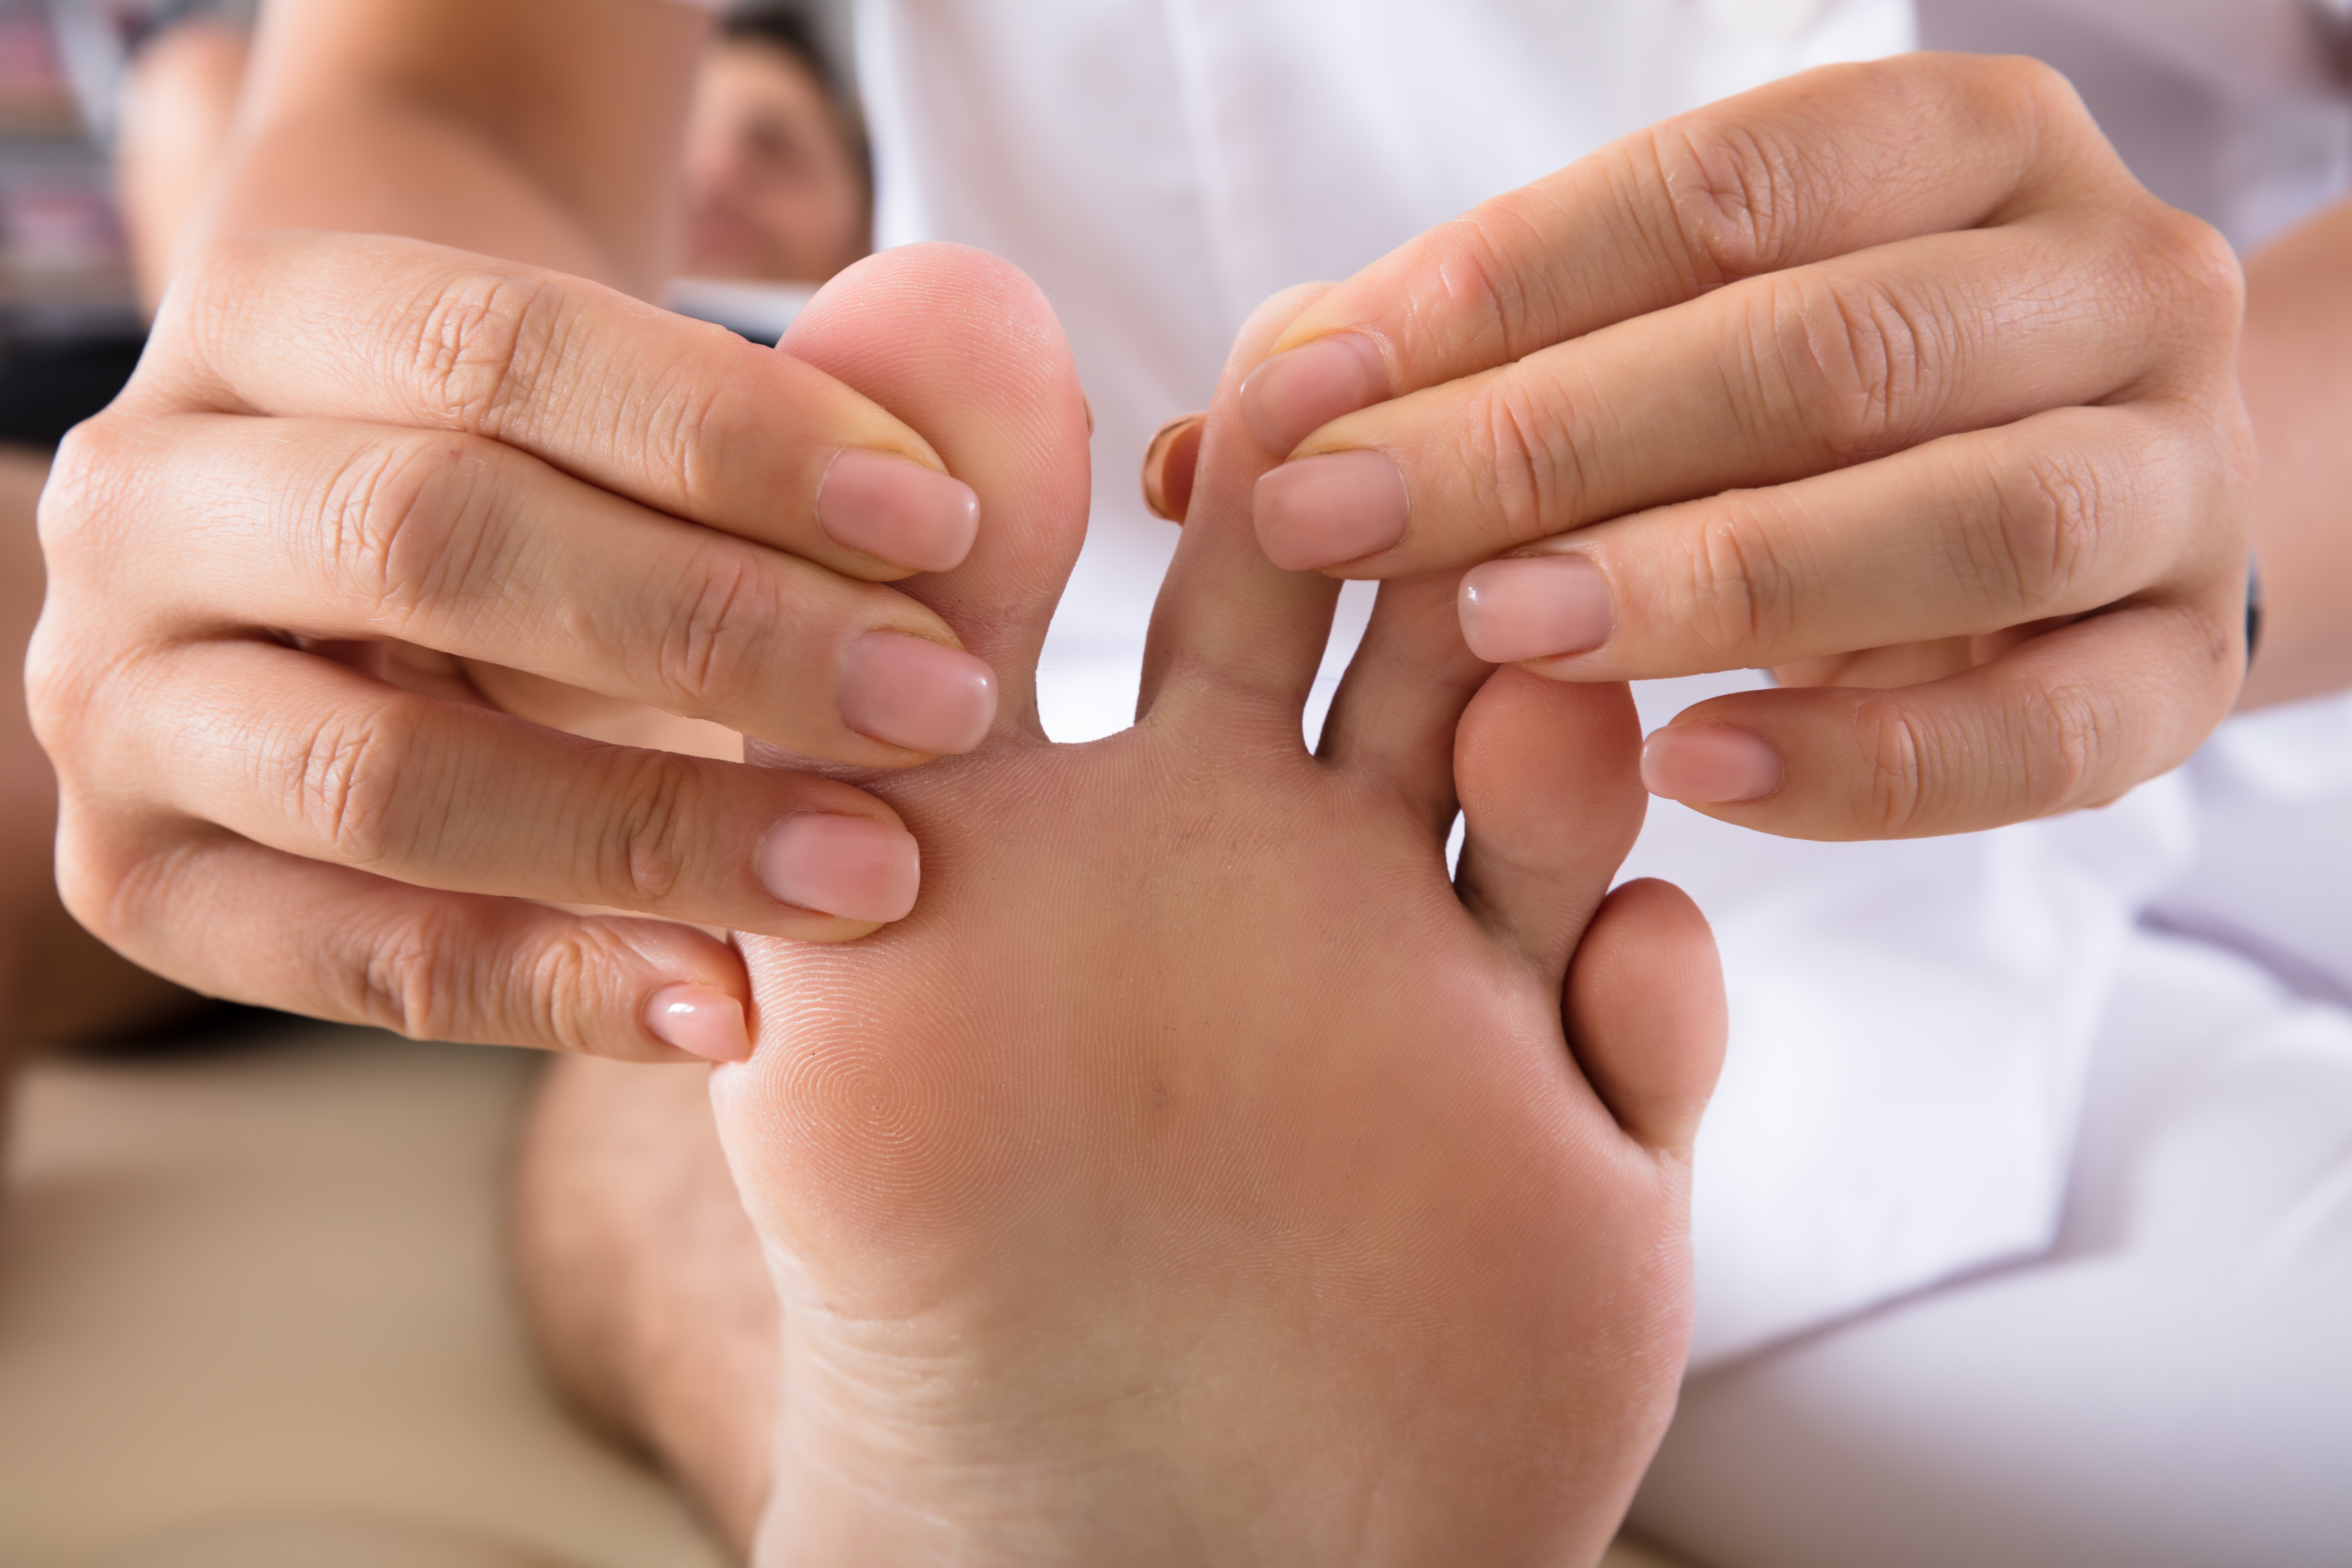 Foot Care and the Best Exercises for Your Feet After Foot Surgery